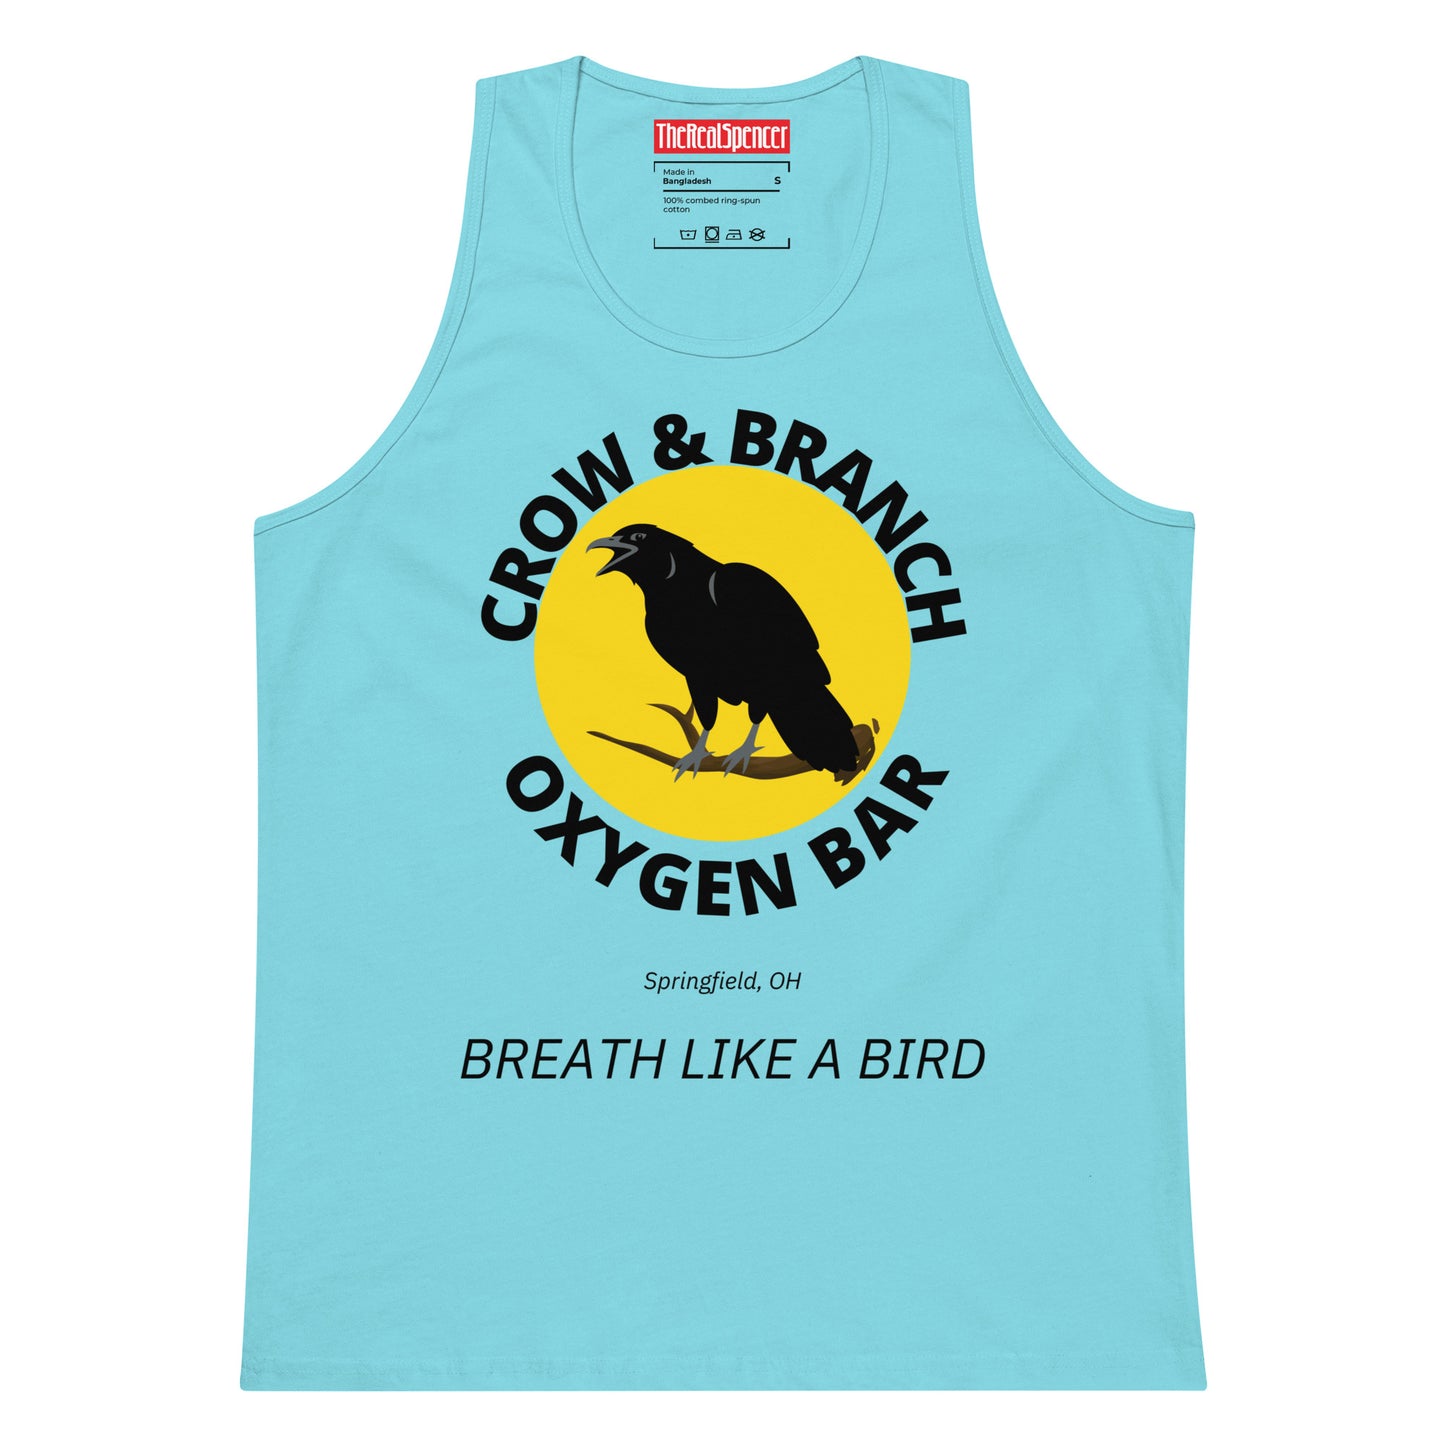 Crow and Branch Tank Top